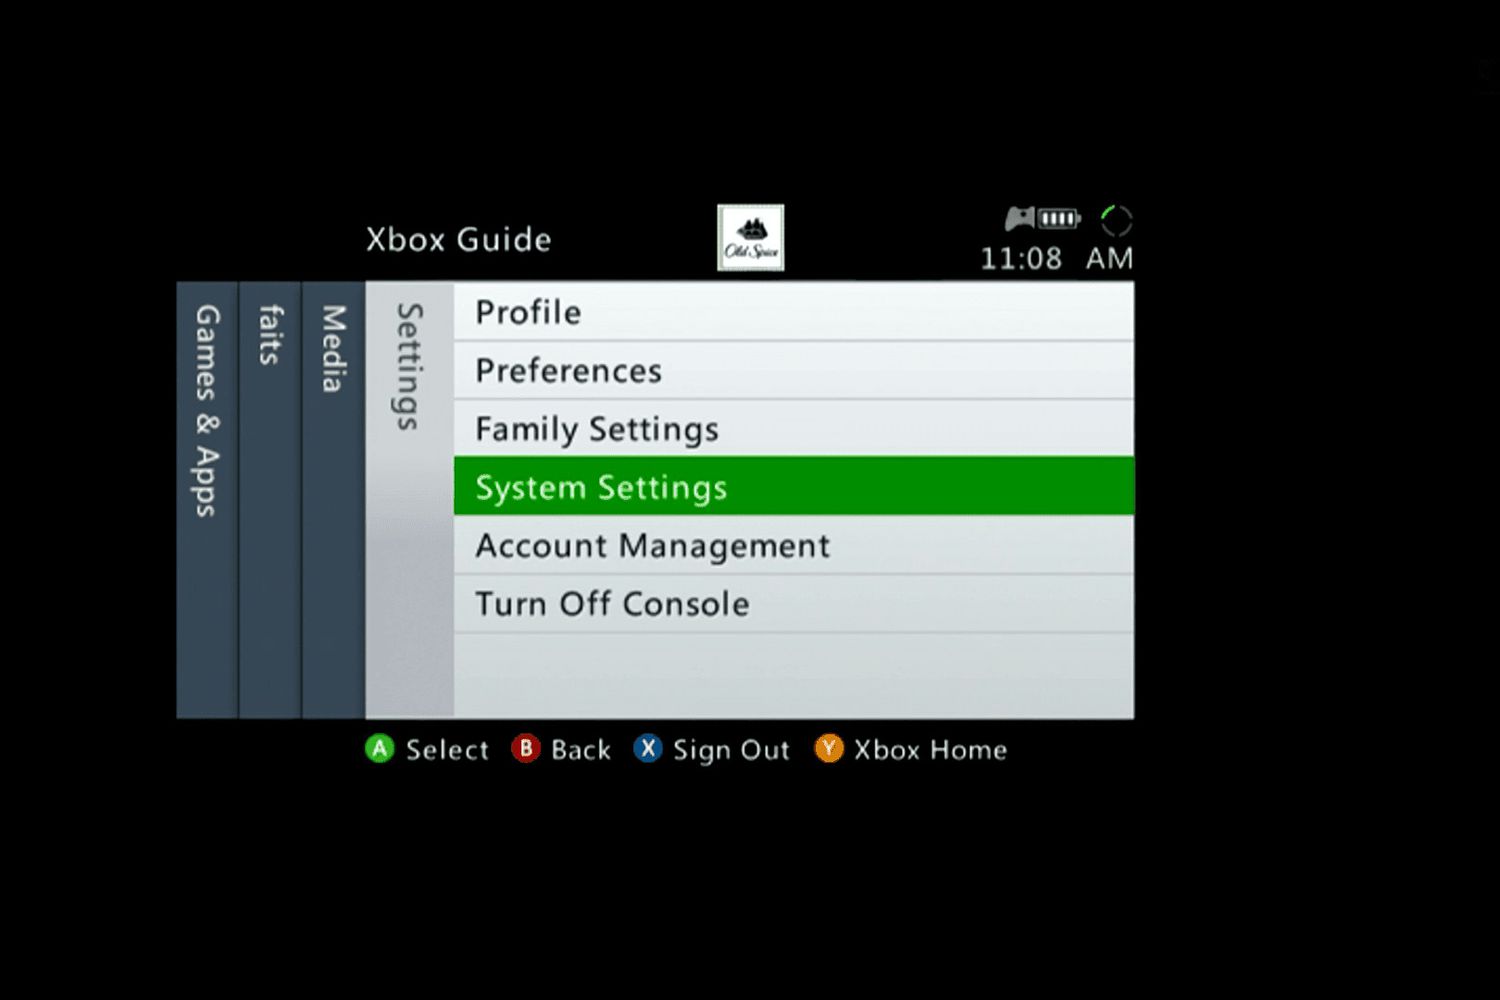 how to reset xbox 360 factory settings